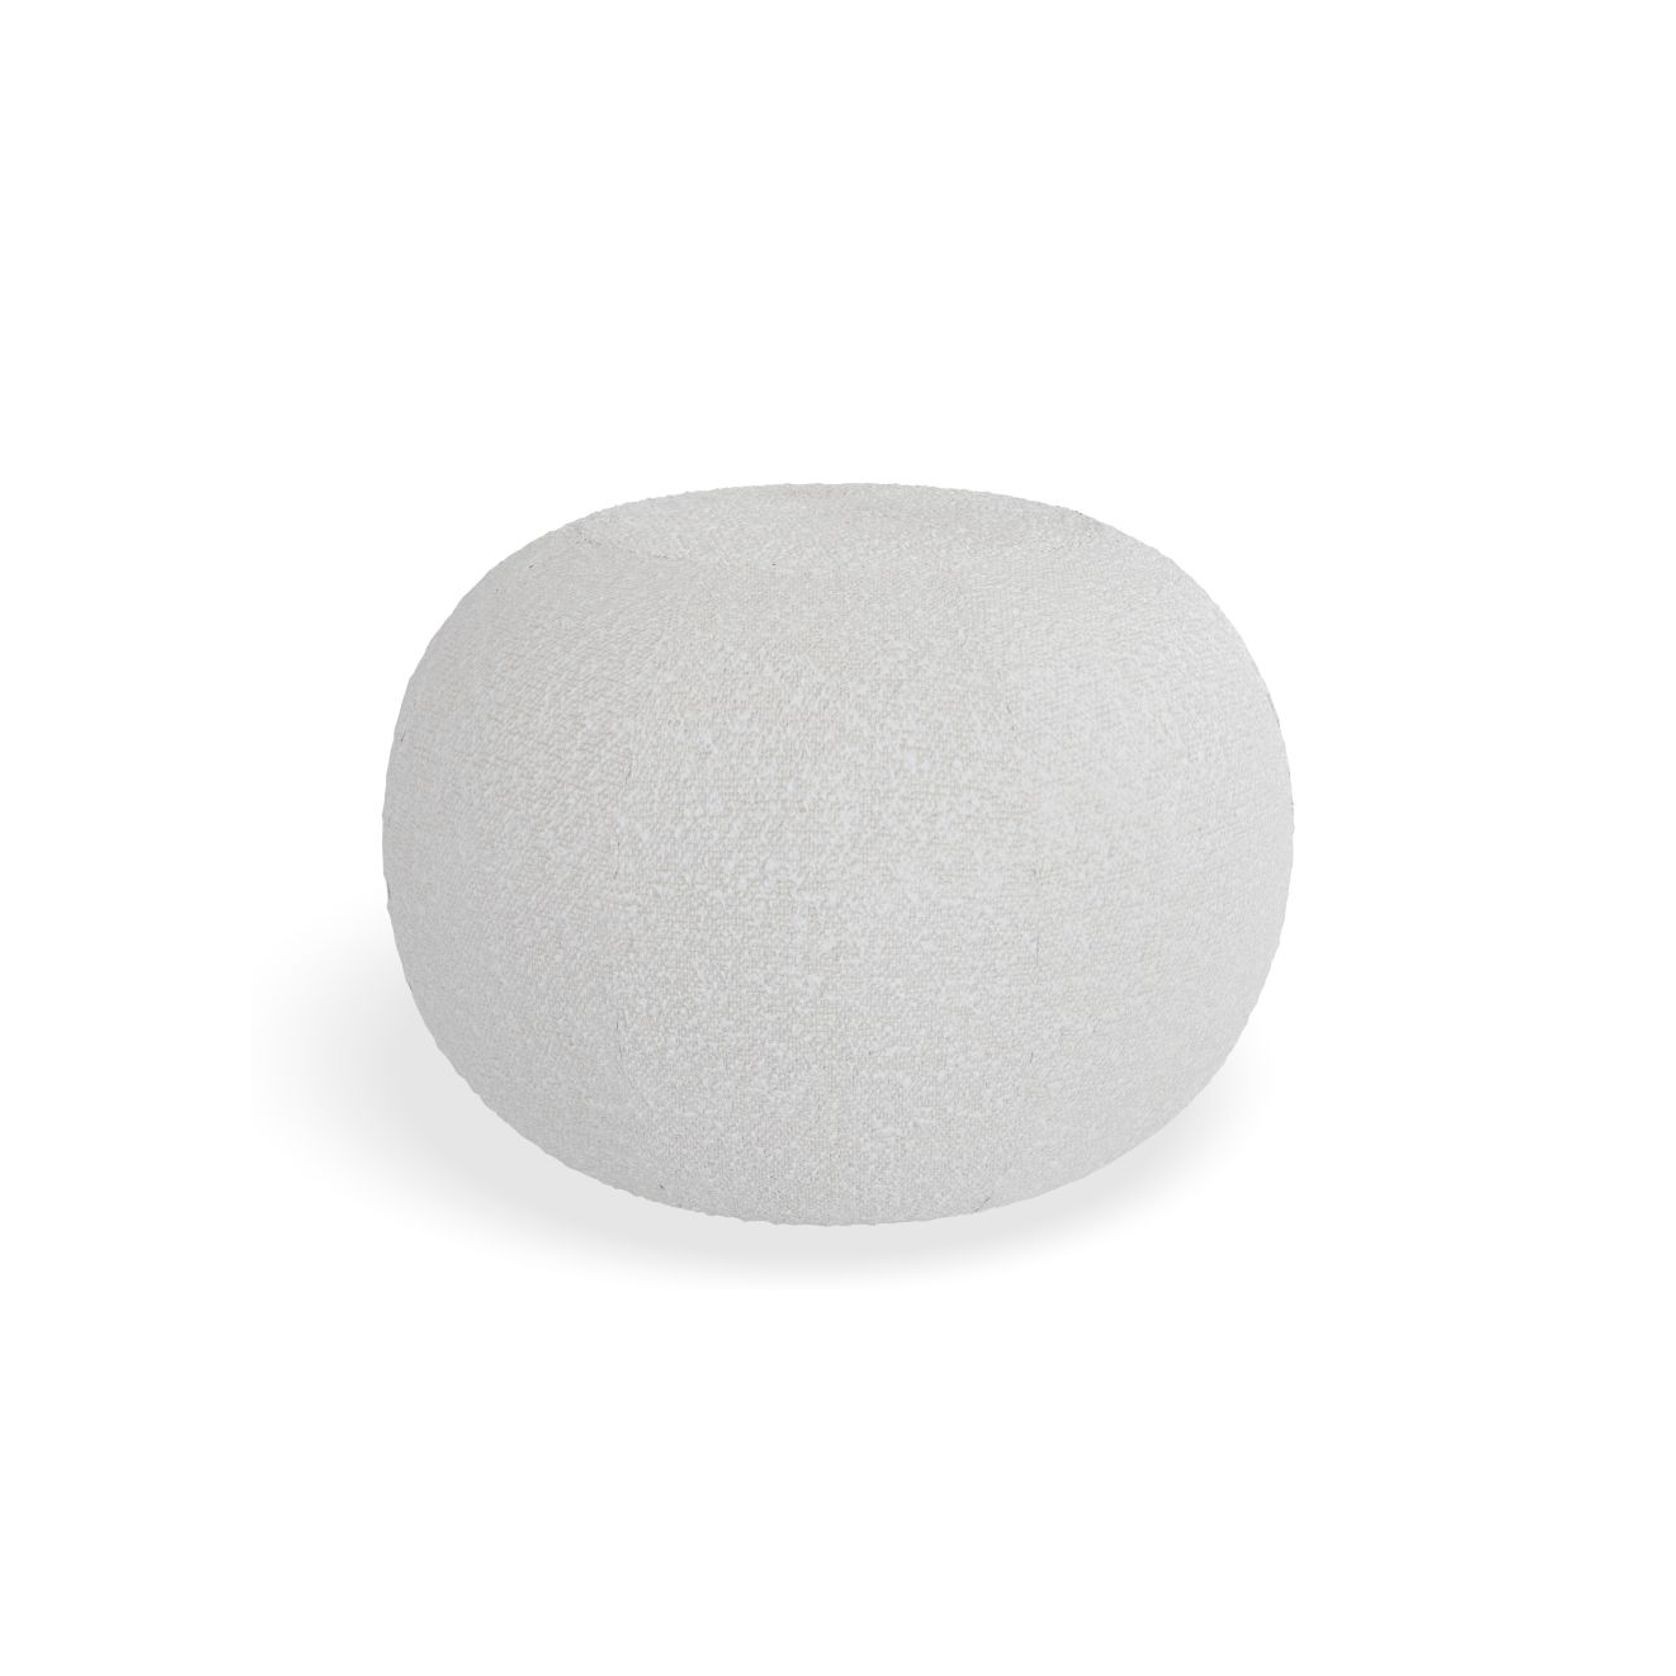 Ronde Pouf in Stone Boucle - Large gallery detail image